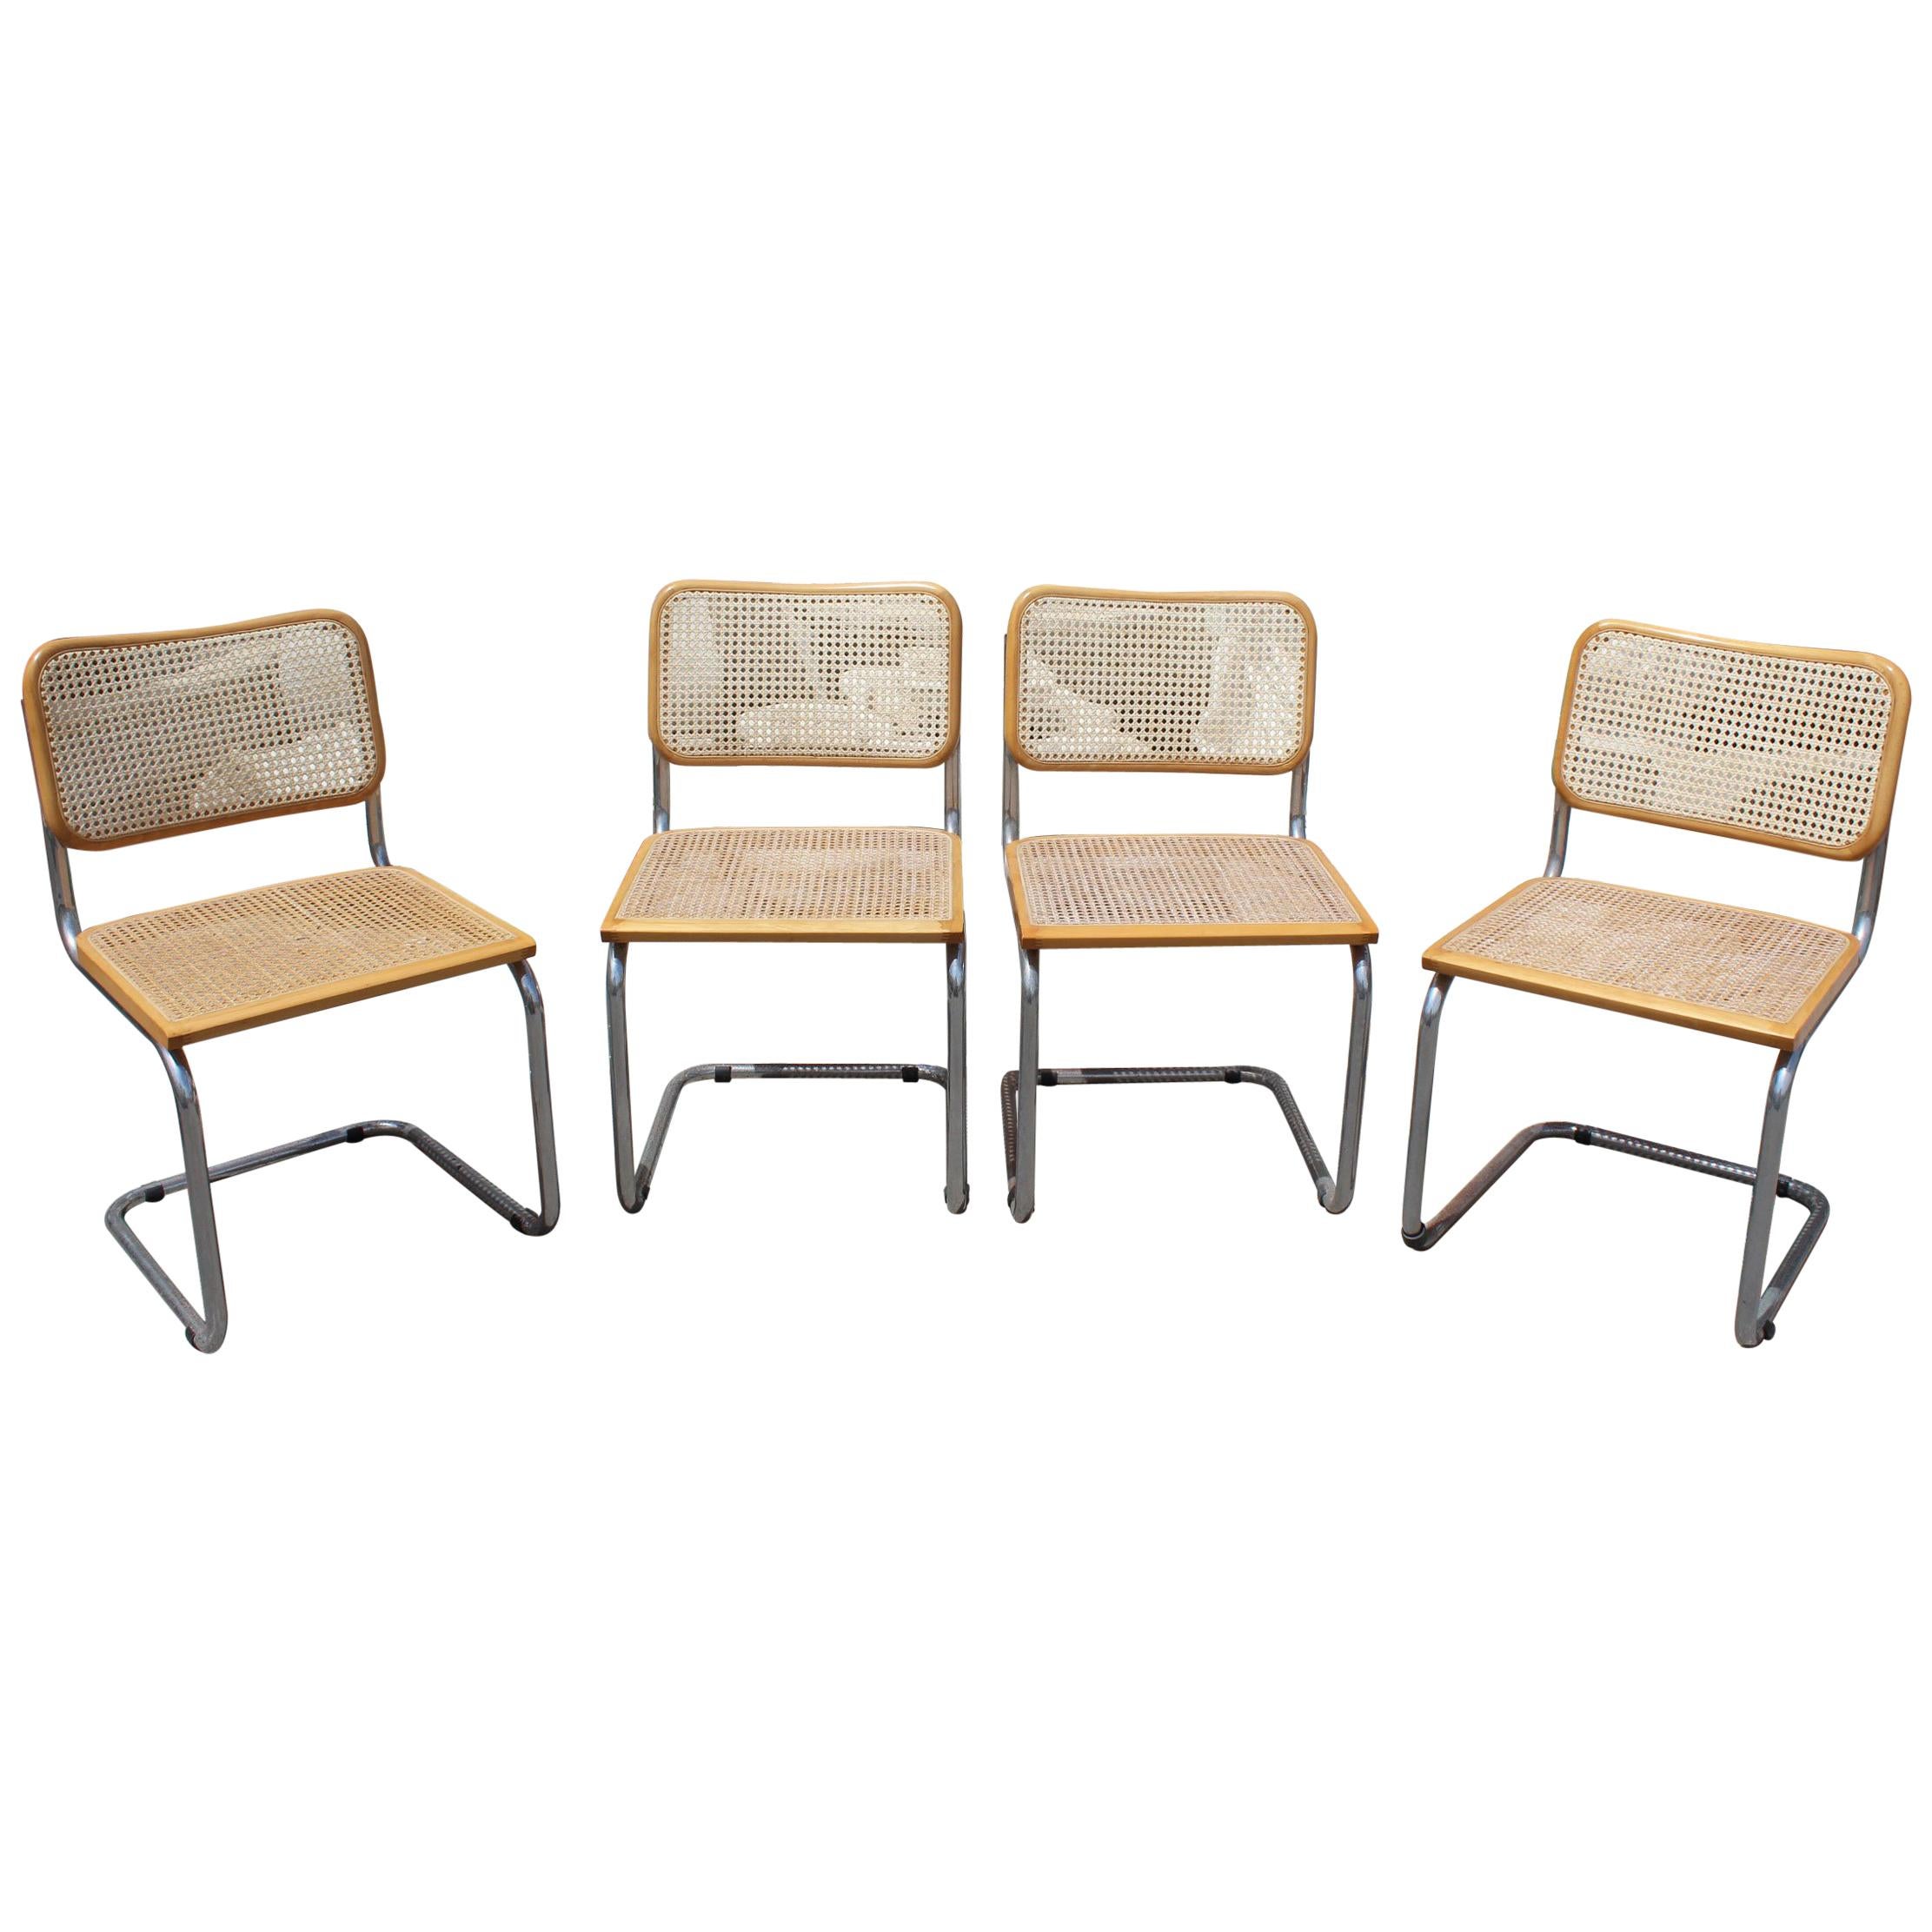 1970s Set of Four Marcel Breuer Cane and Wicker Chrome "Cesca" Chairs